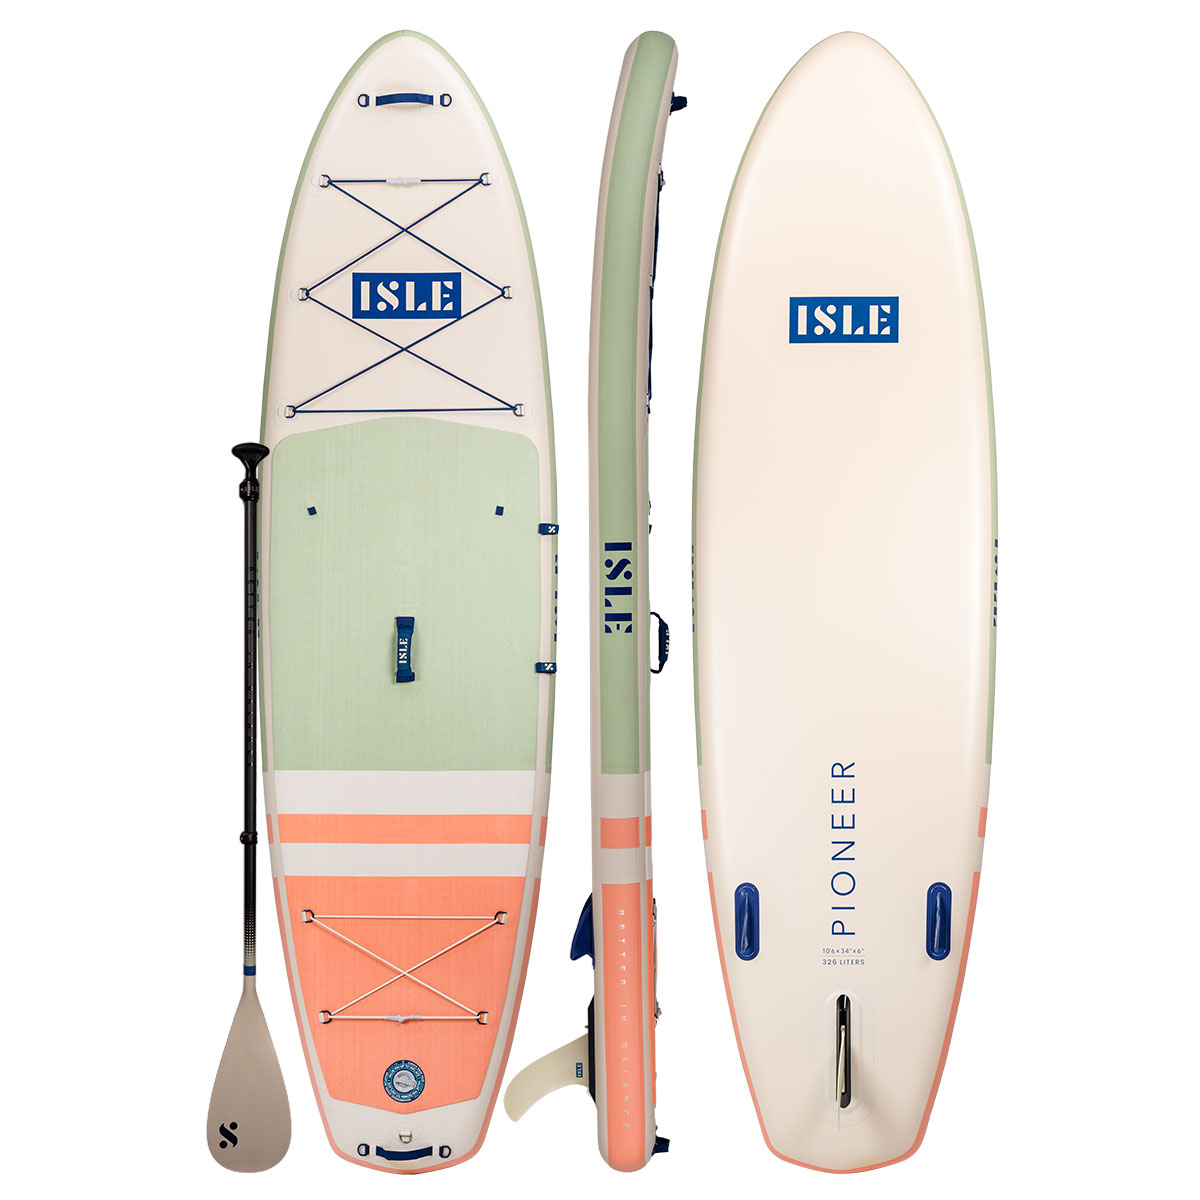 Pioneer 2.0Inflatable Paddle Board PackageThe best all-around paddle board for every type of activity, featuring a double layer, drop-stitch construction, making it our most durable build yet. Stable and lightweight, this inflatable SUP is perfect for riders up to 285 lbs.